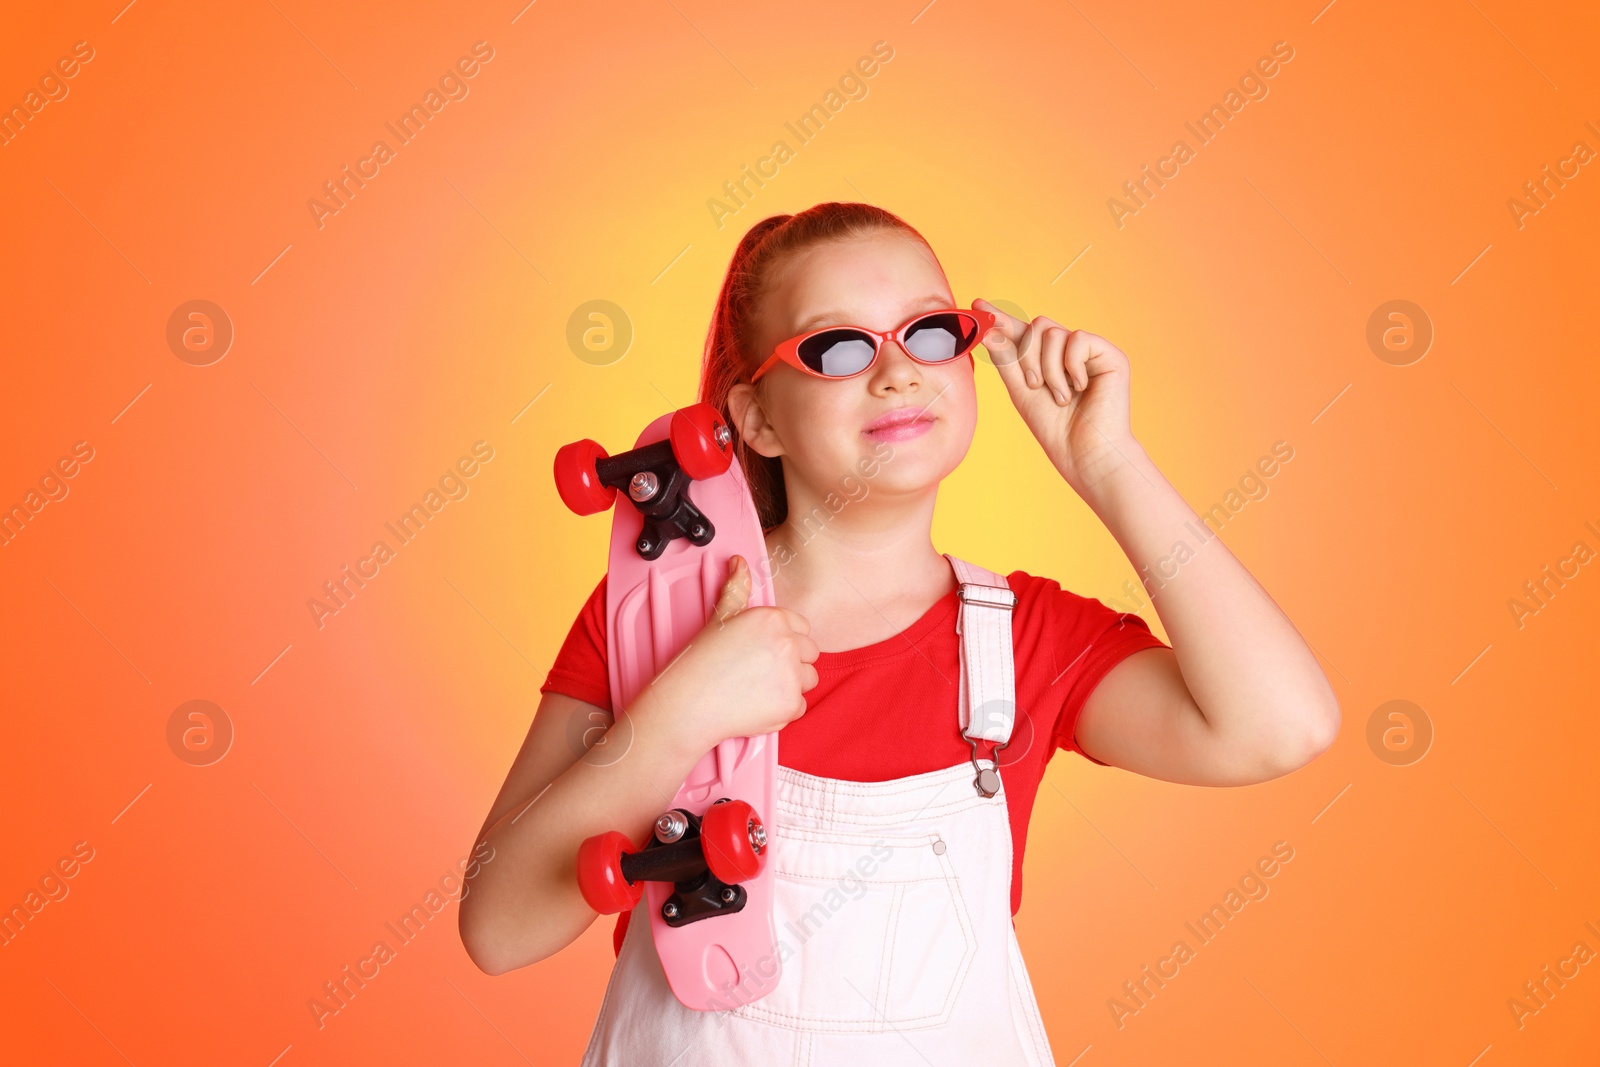 Photo of Cute indie girl with sunglasses and penny board on color background